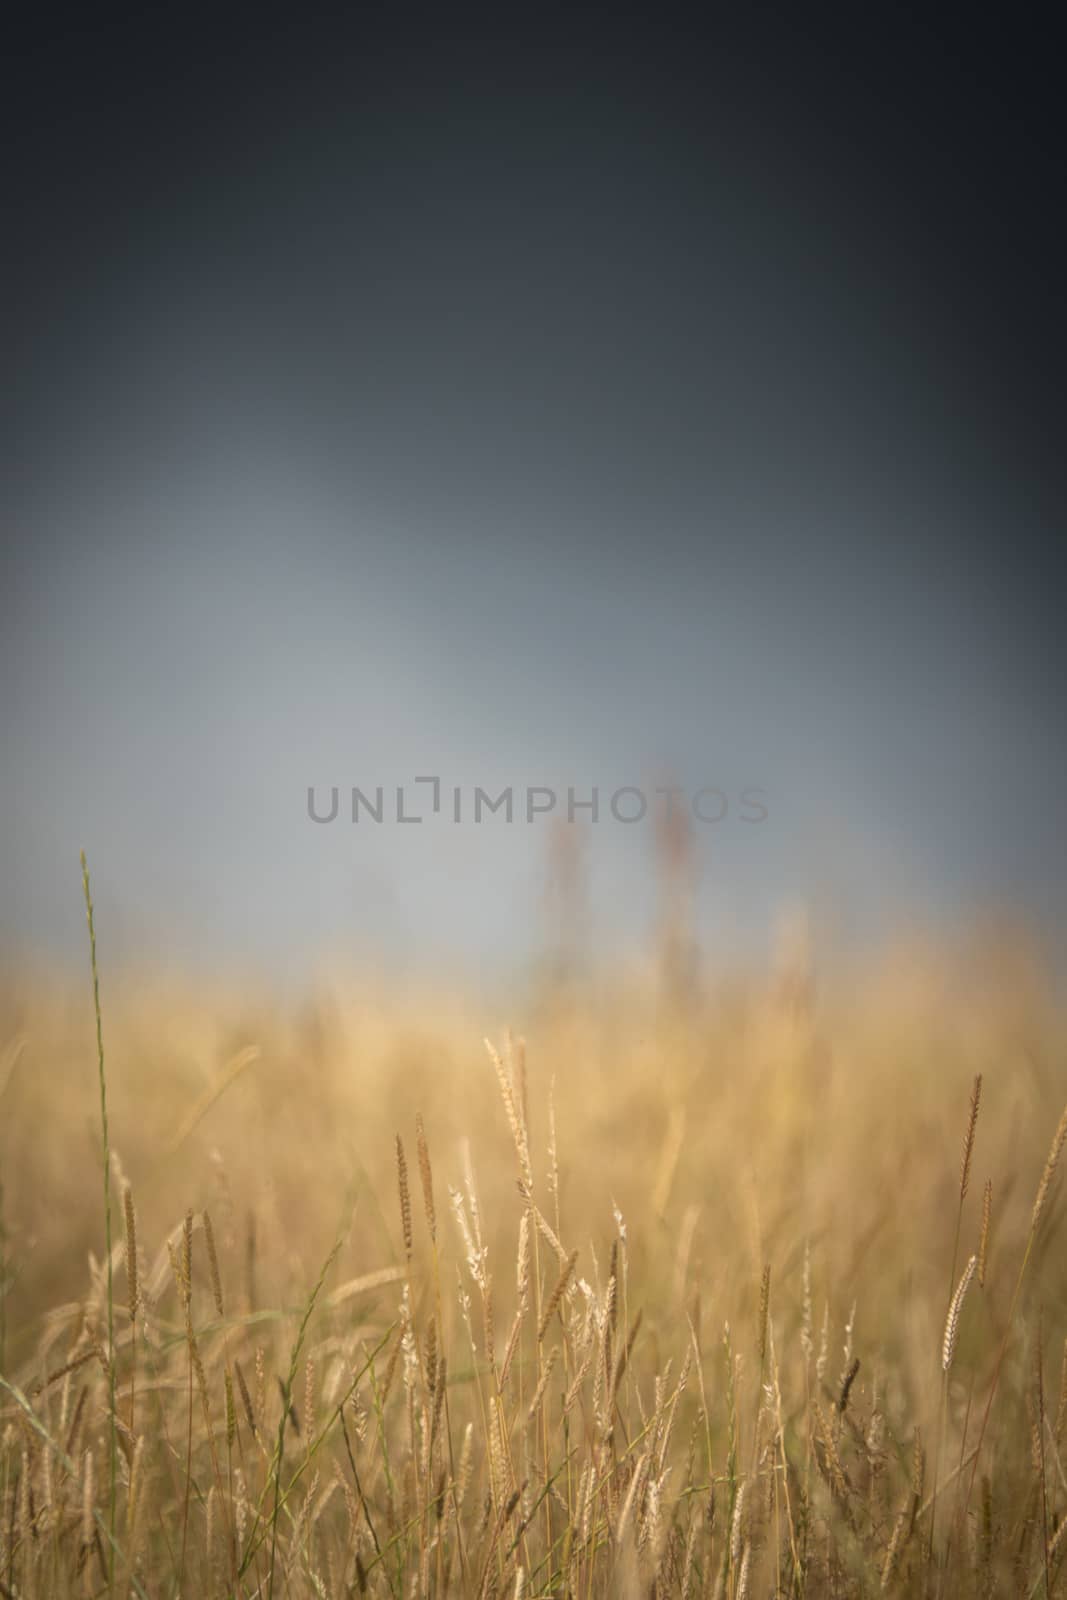 Very Shallow Focus Conceptual Image Of A Storm Brewing Over A Wheat Field With Copy Space